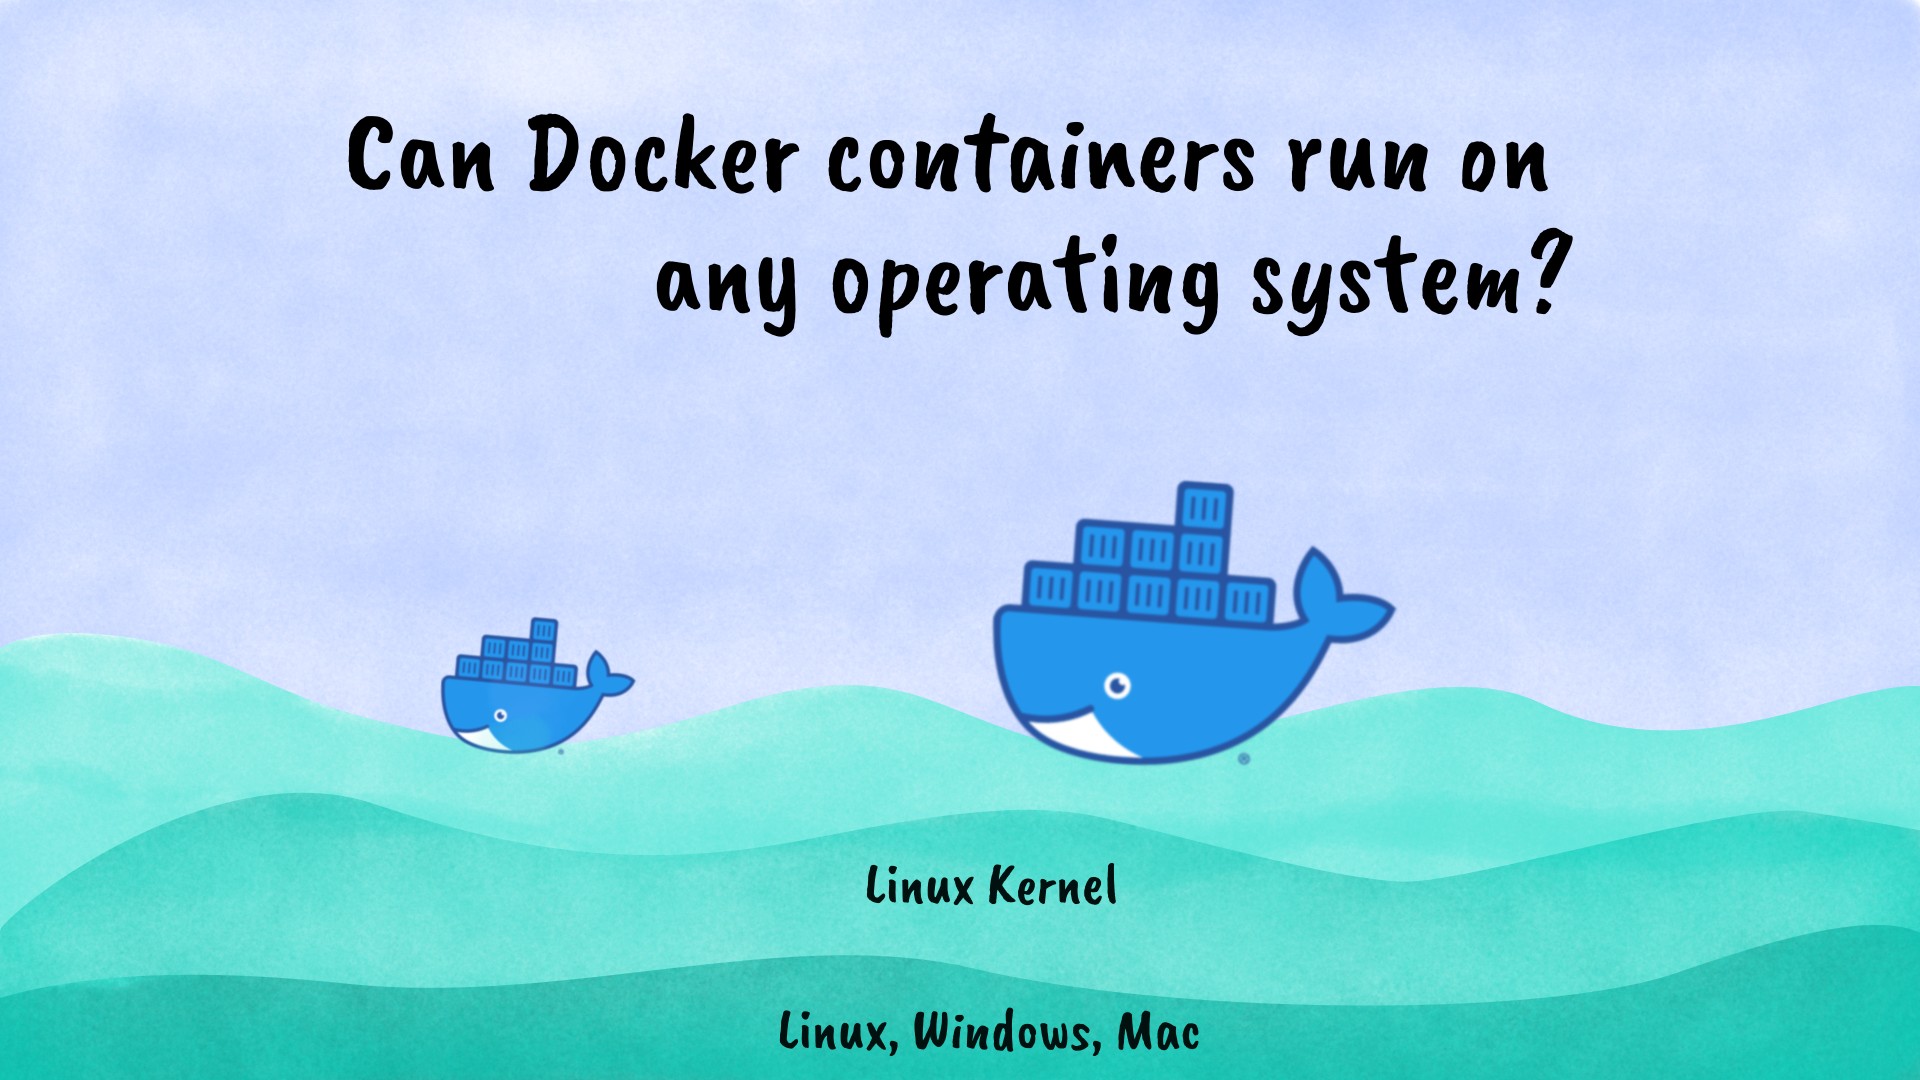 There is three layers of sea waves. Bottom layer has Linux, Windows, Mac text. Middle layer has Linux Kernel text. Top layer has Docker moby logo.